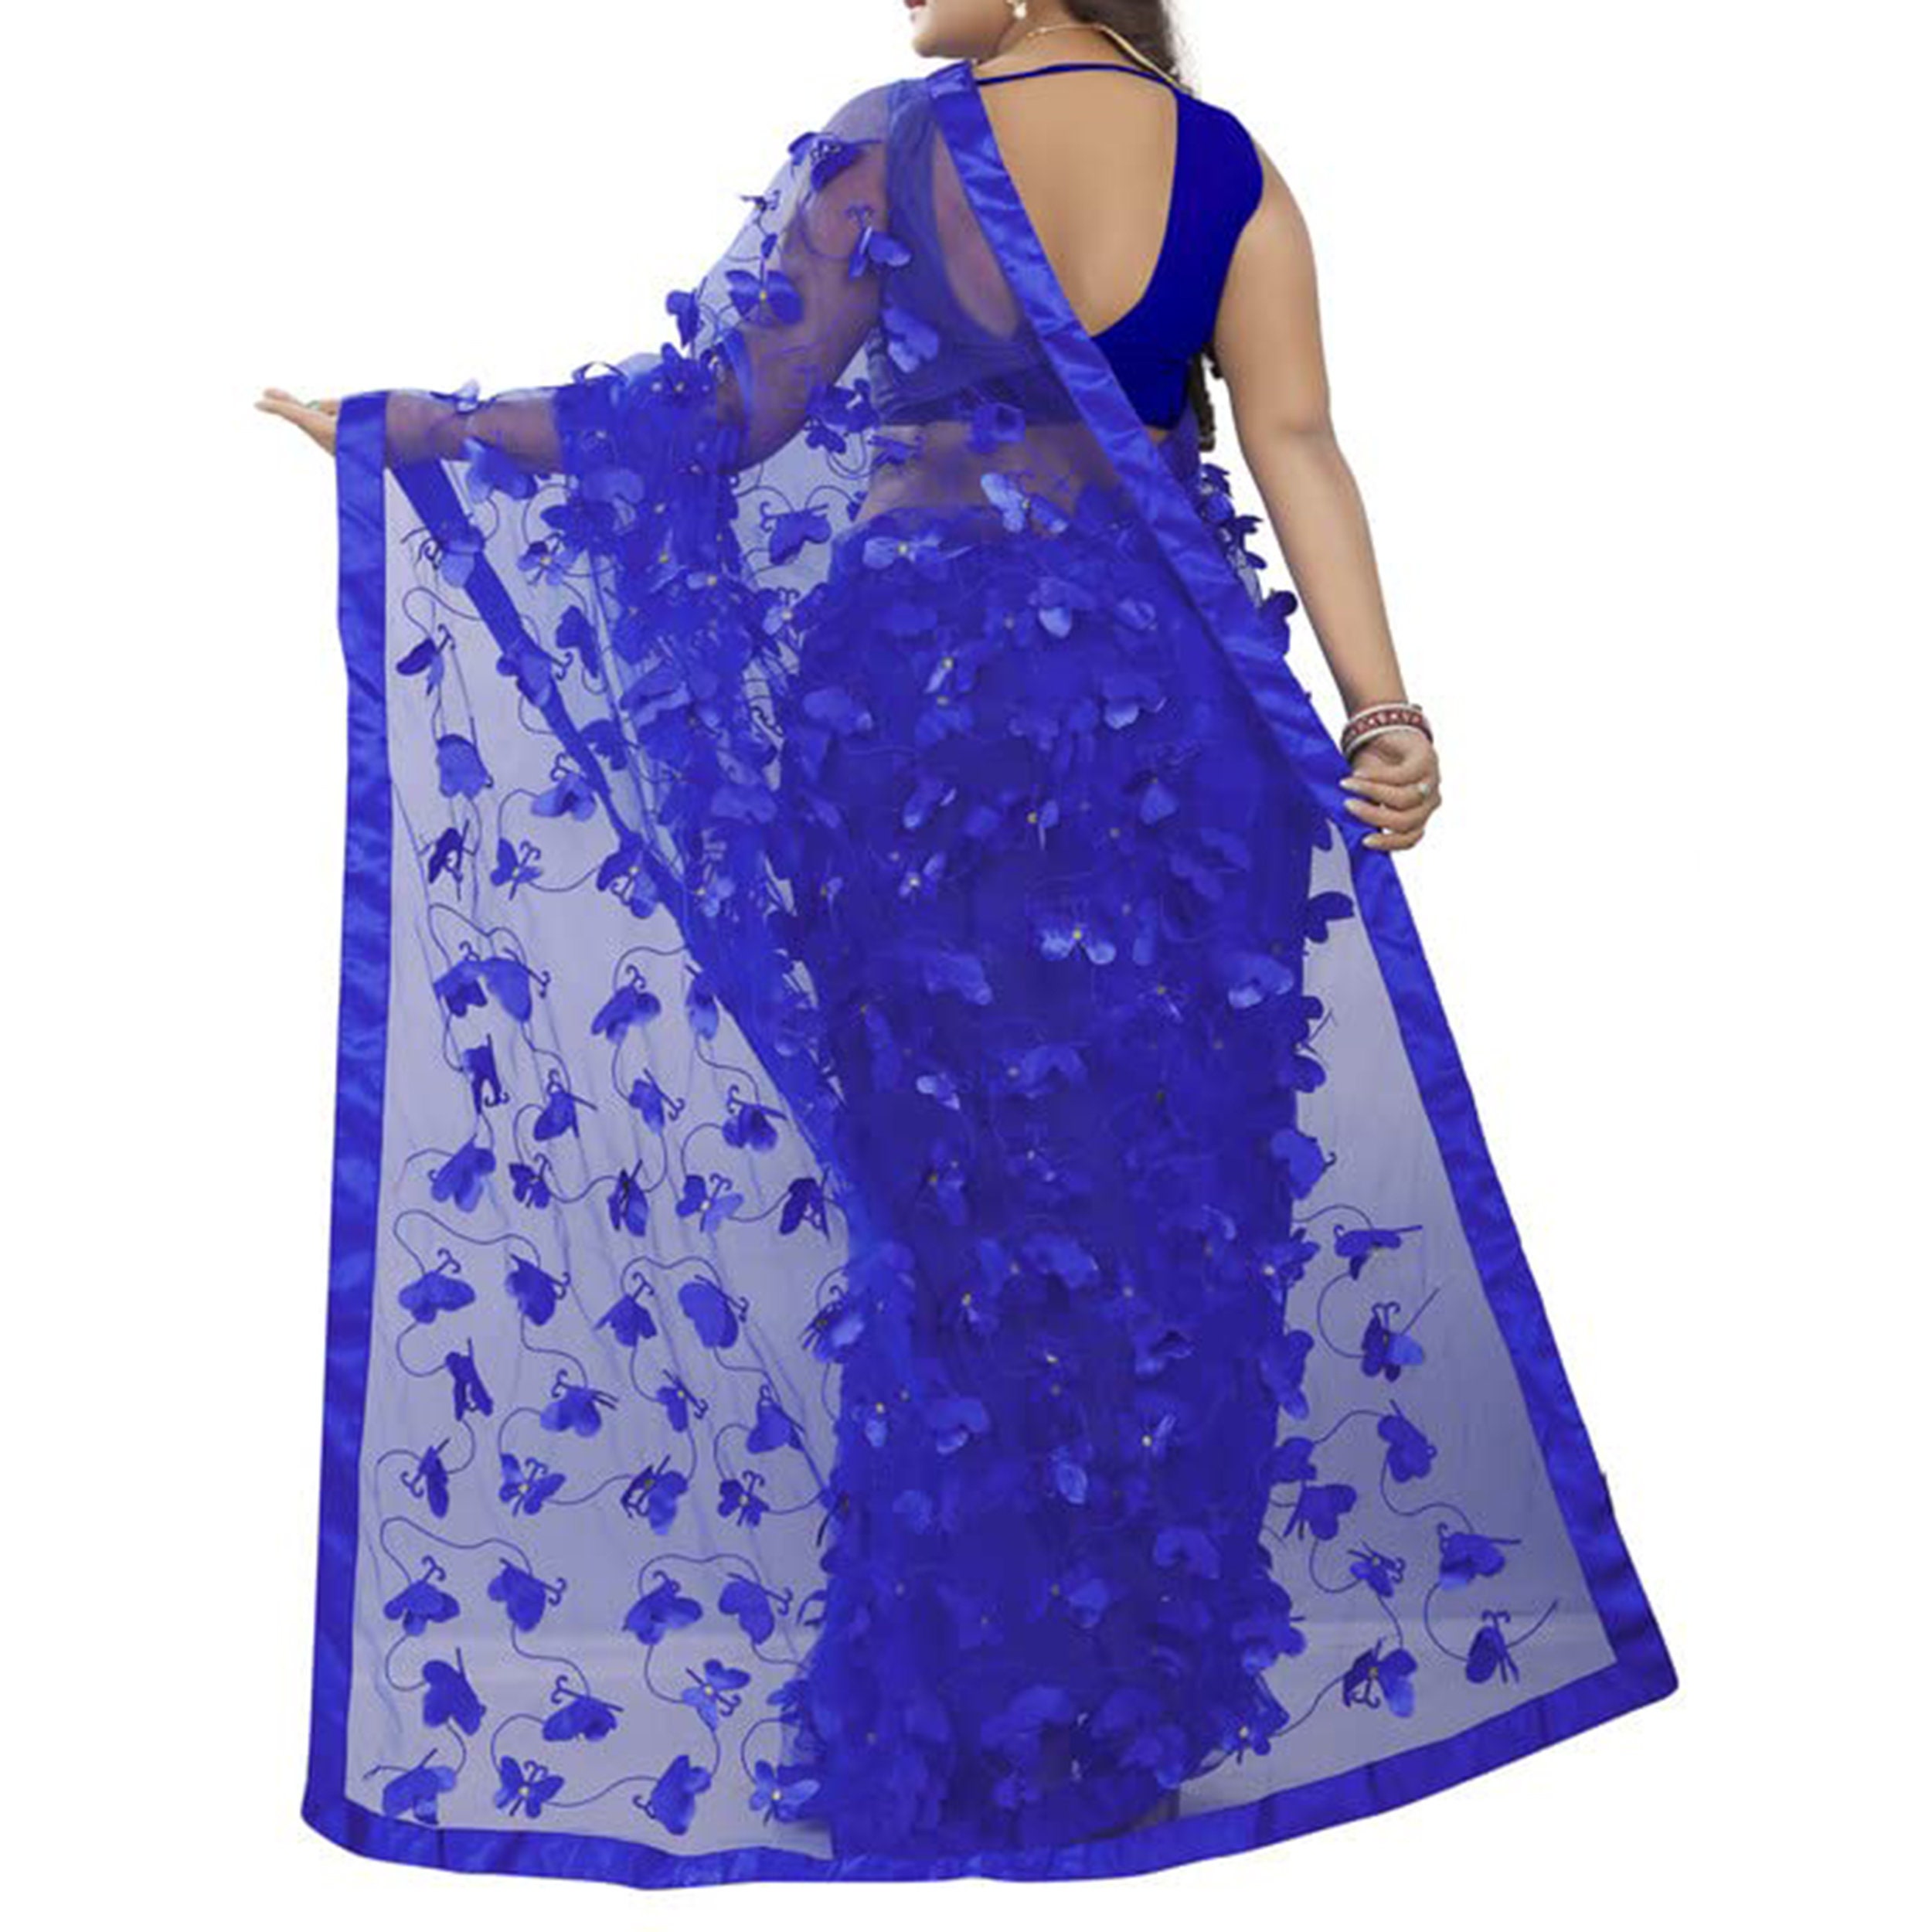 Women's Butterfly Fashionable Designer Net Saree for Wedding & Traditional  Indian Ethnic Bollywood Style Saree Beautiful Fancy Sari Blouse 